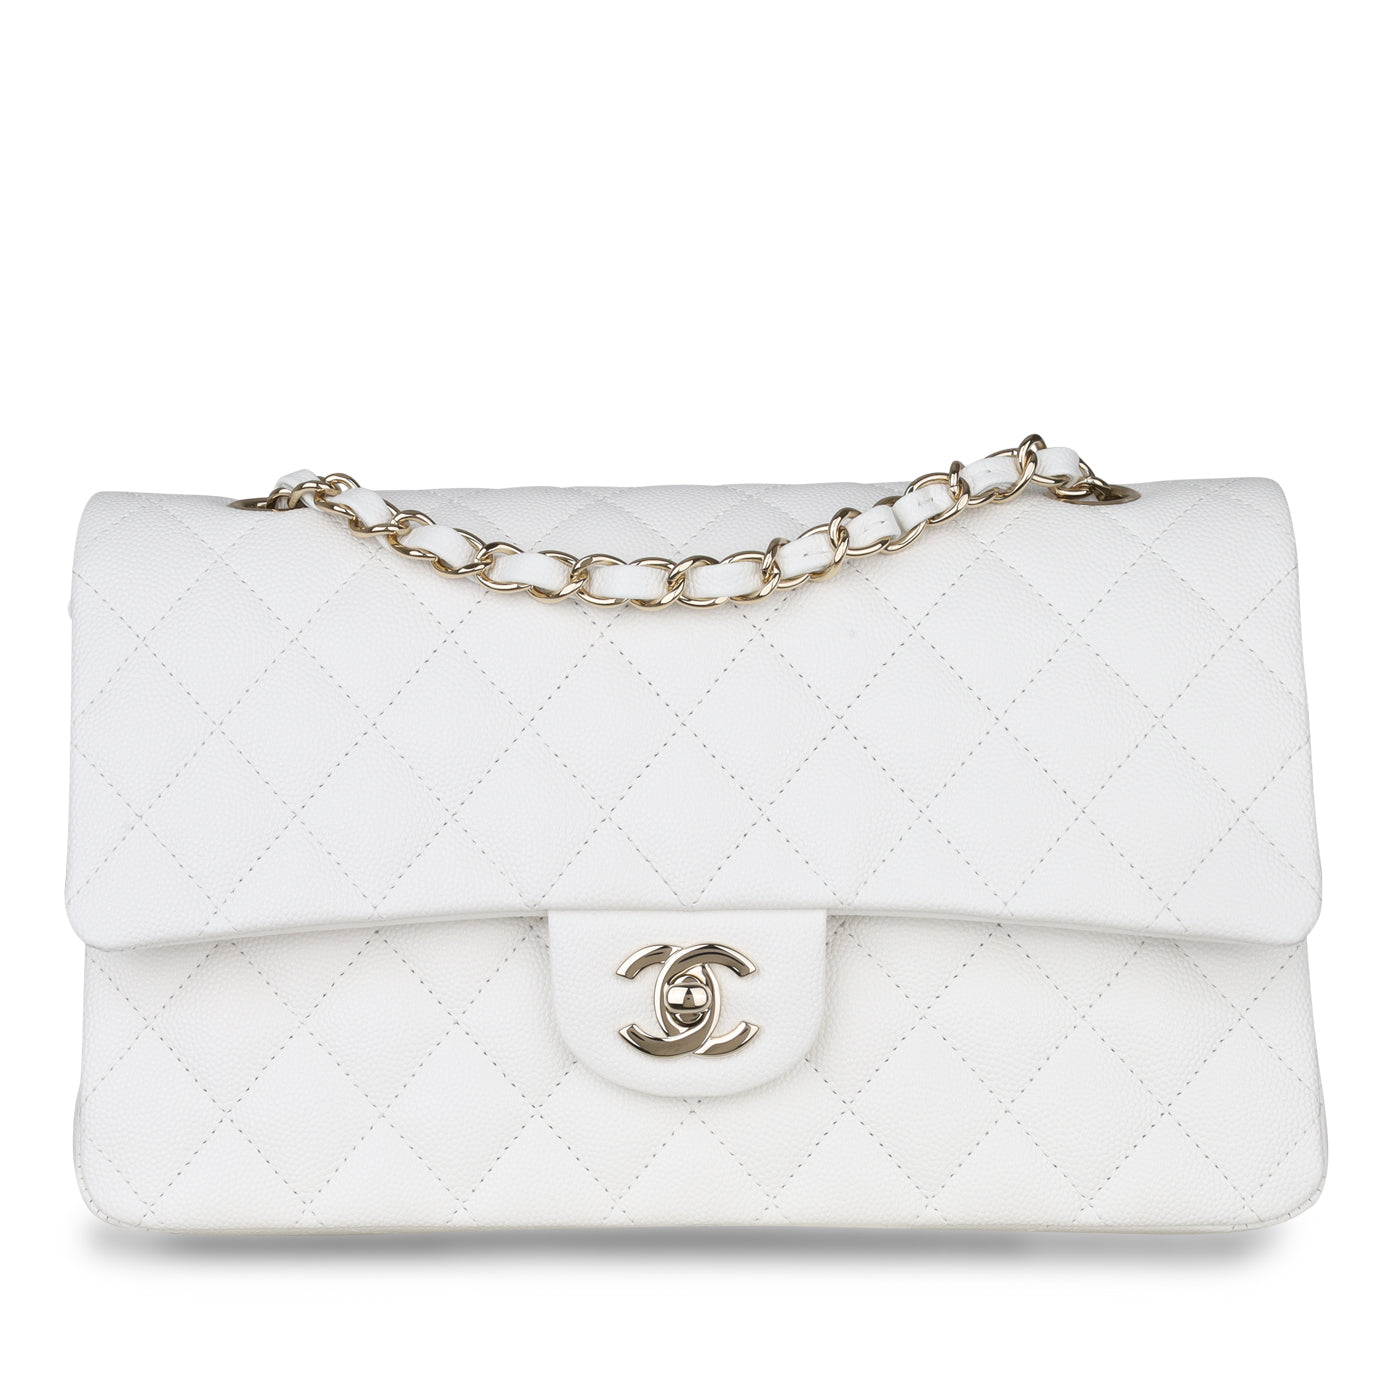 Chanel Caviar Quilted Medium Classic Double Flap Bag White 